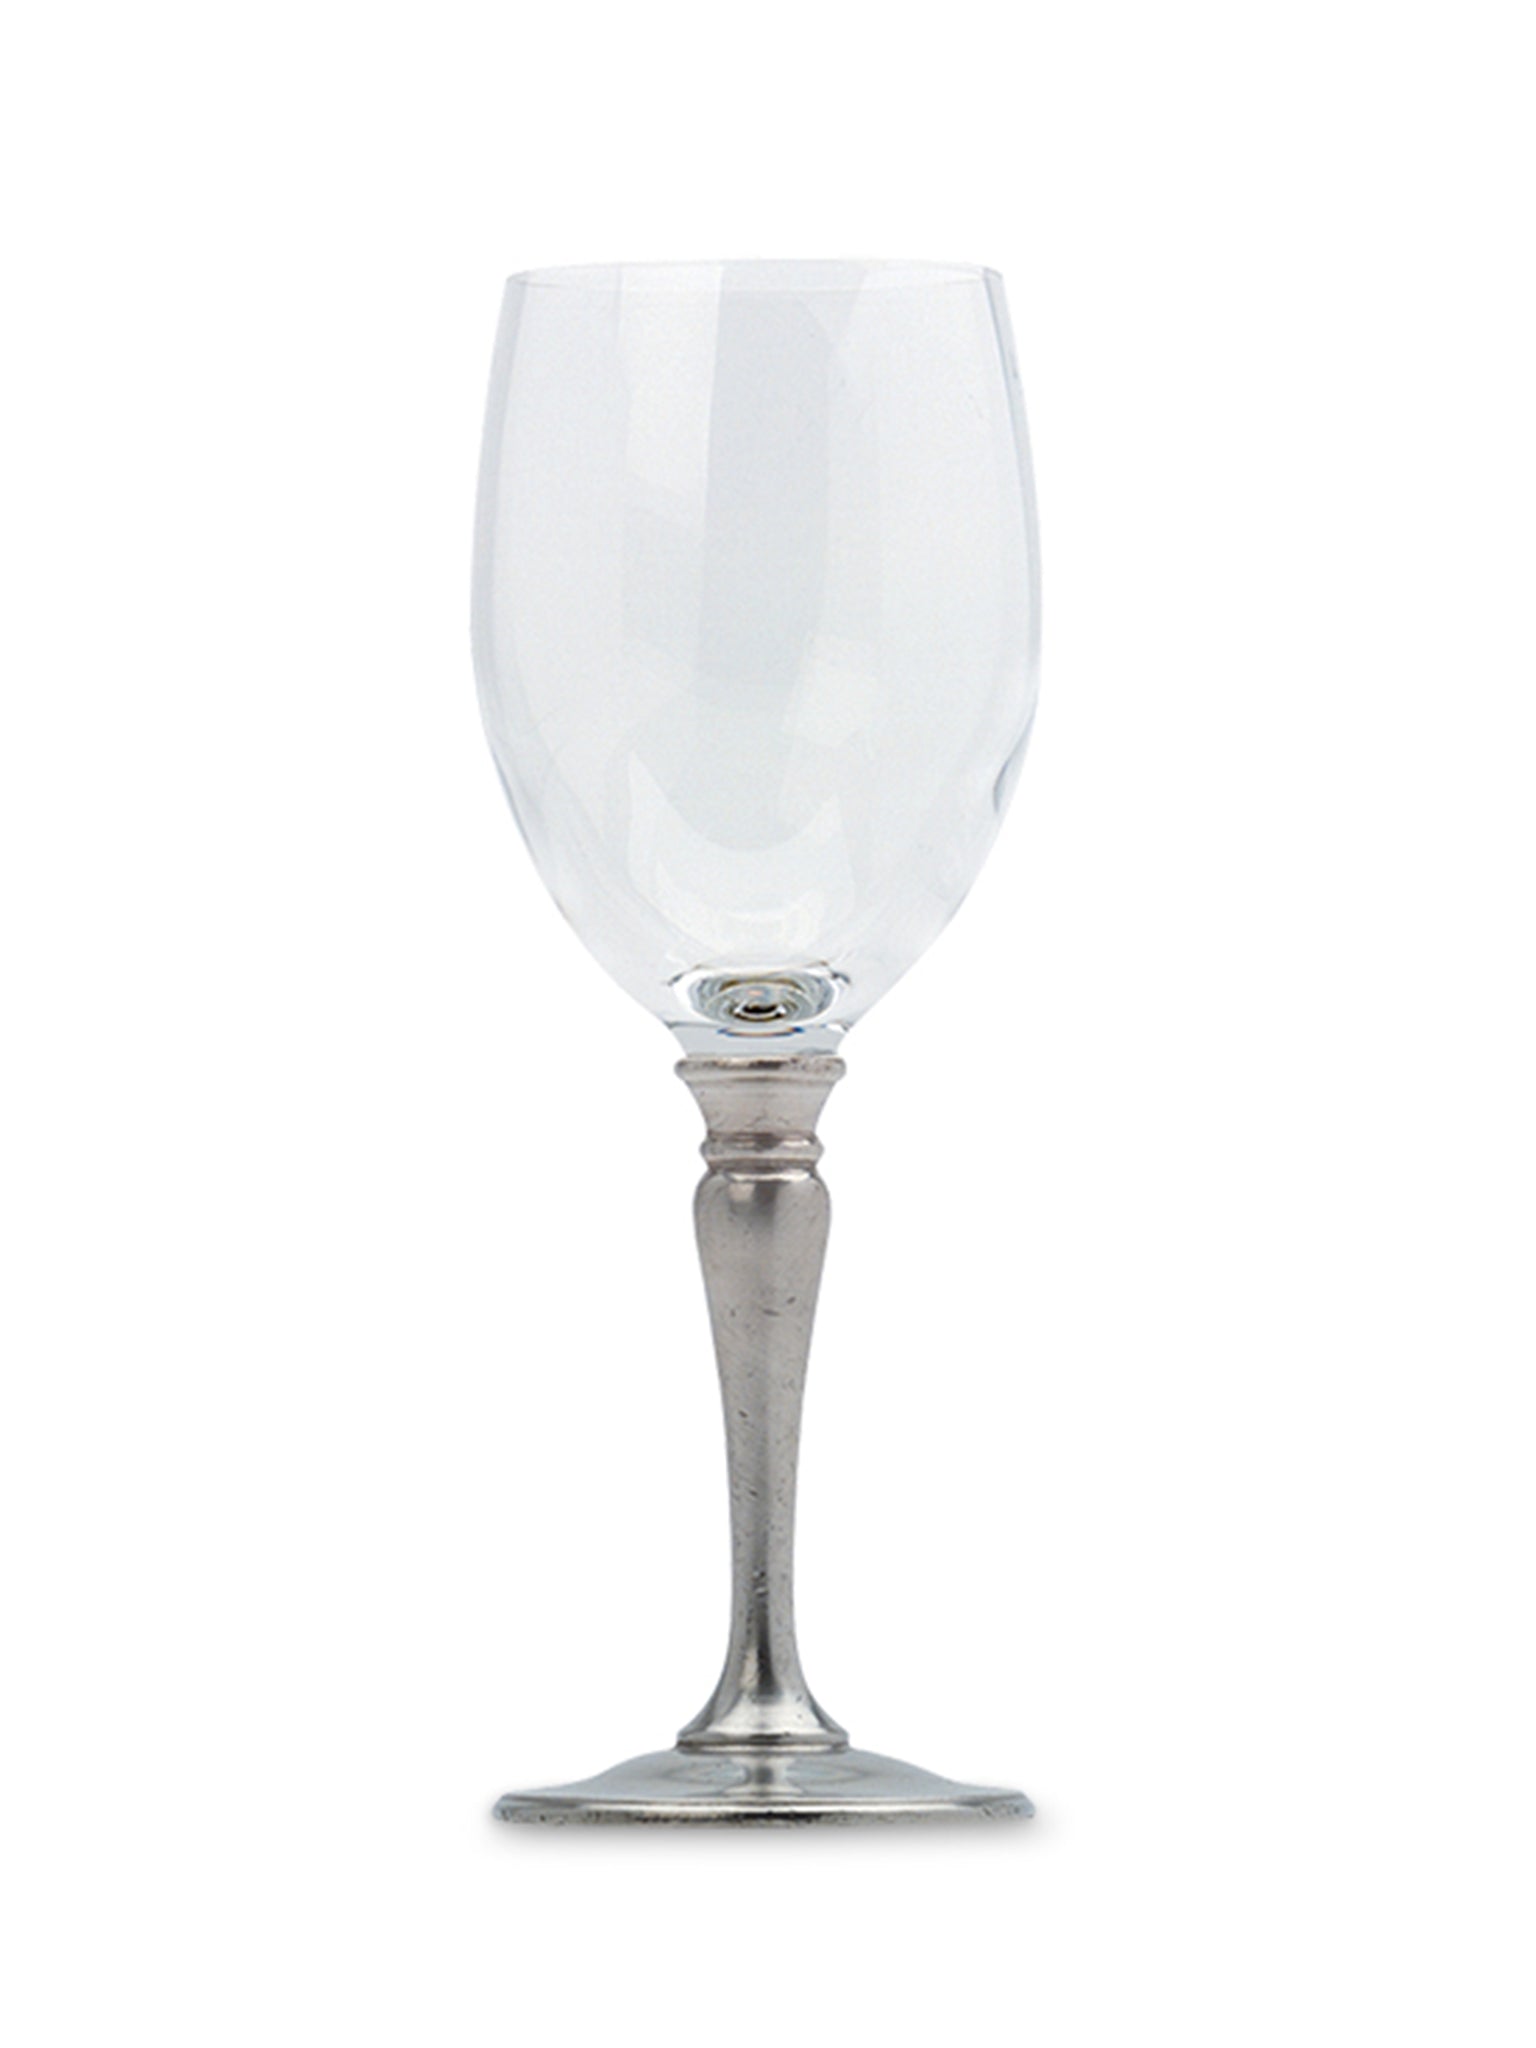 MATCH Pewter All Purpose Wine Glass Weston Table